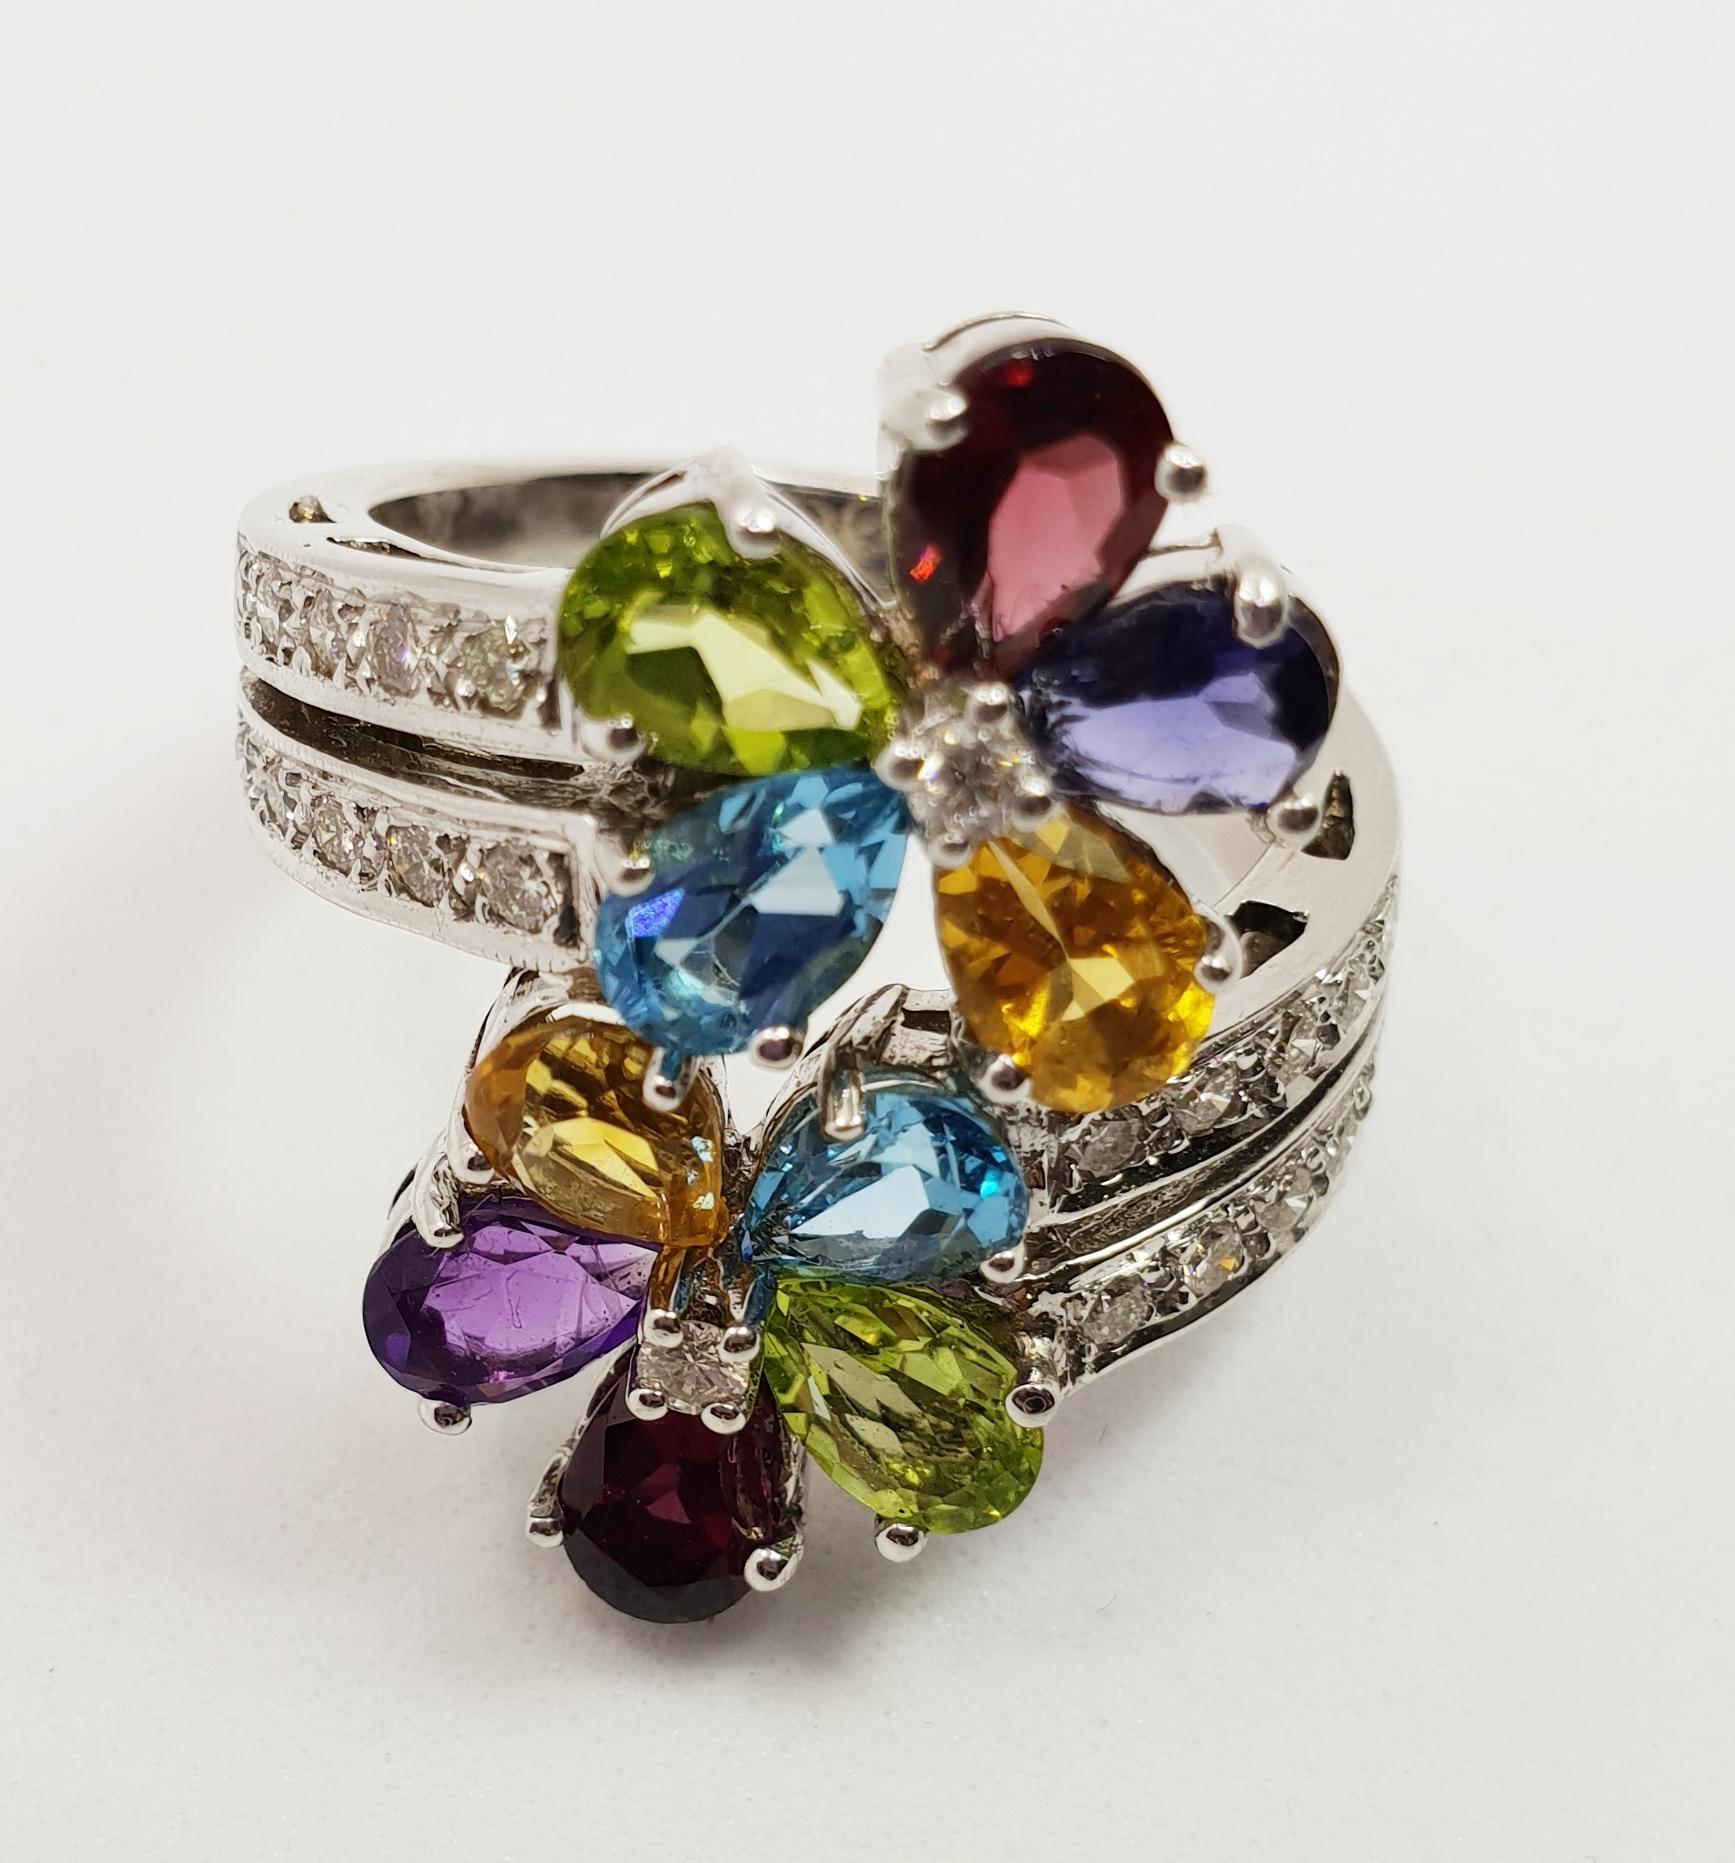 Metal: 18k White Gold
Diamonds Details: Round brilliant diamonds
Gemstone Details: Garnet, Peridote,  Amathyst, Citrine, and Topaz  5.75mm each
Item Weight: 11.5 gr 
Comes With: This item comes with a presentation box
Size 16 but can be adjusted